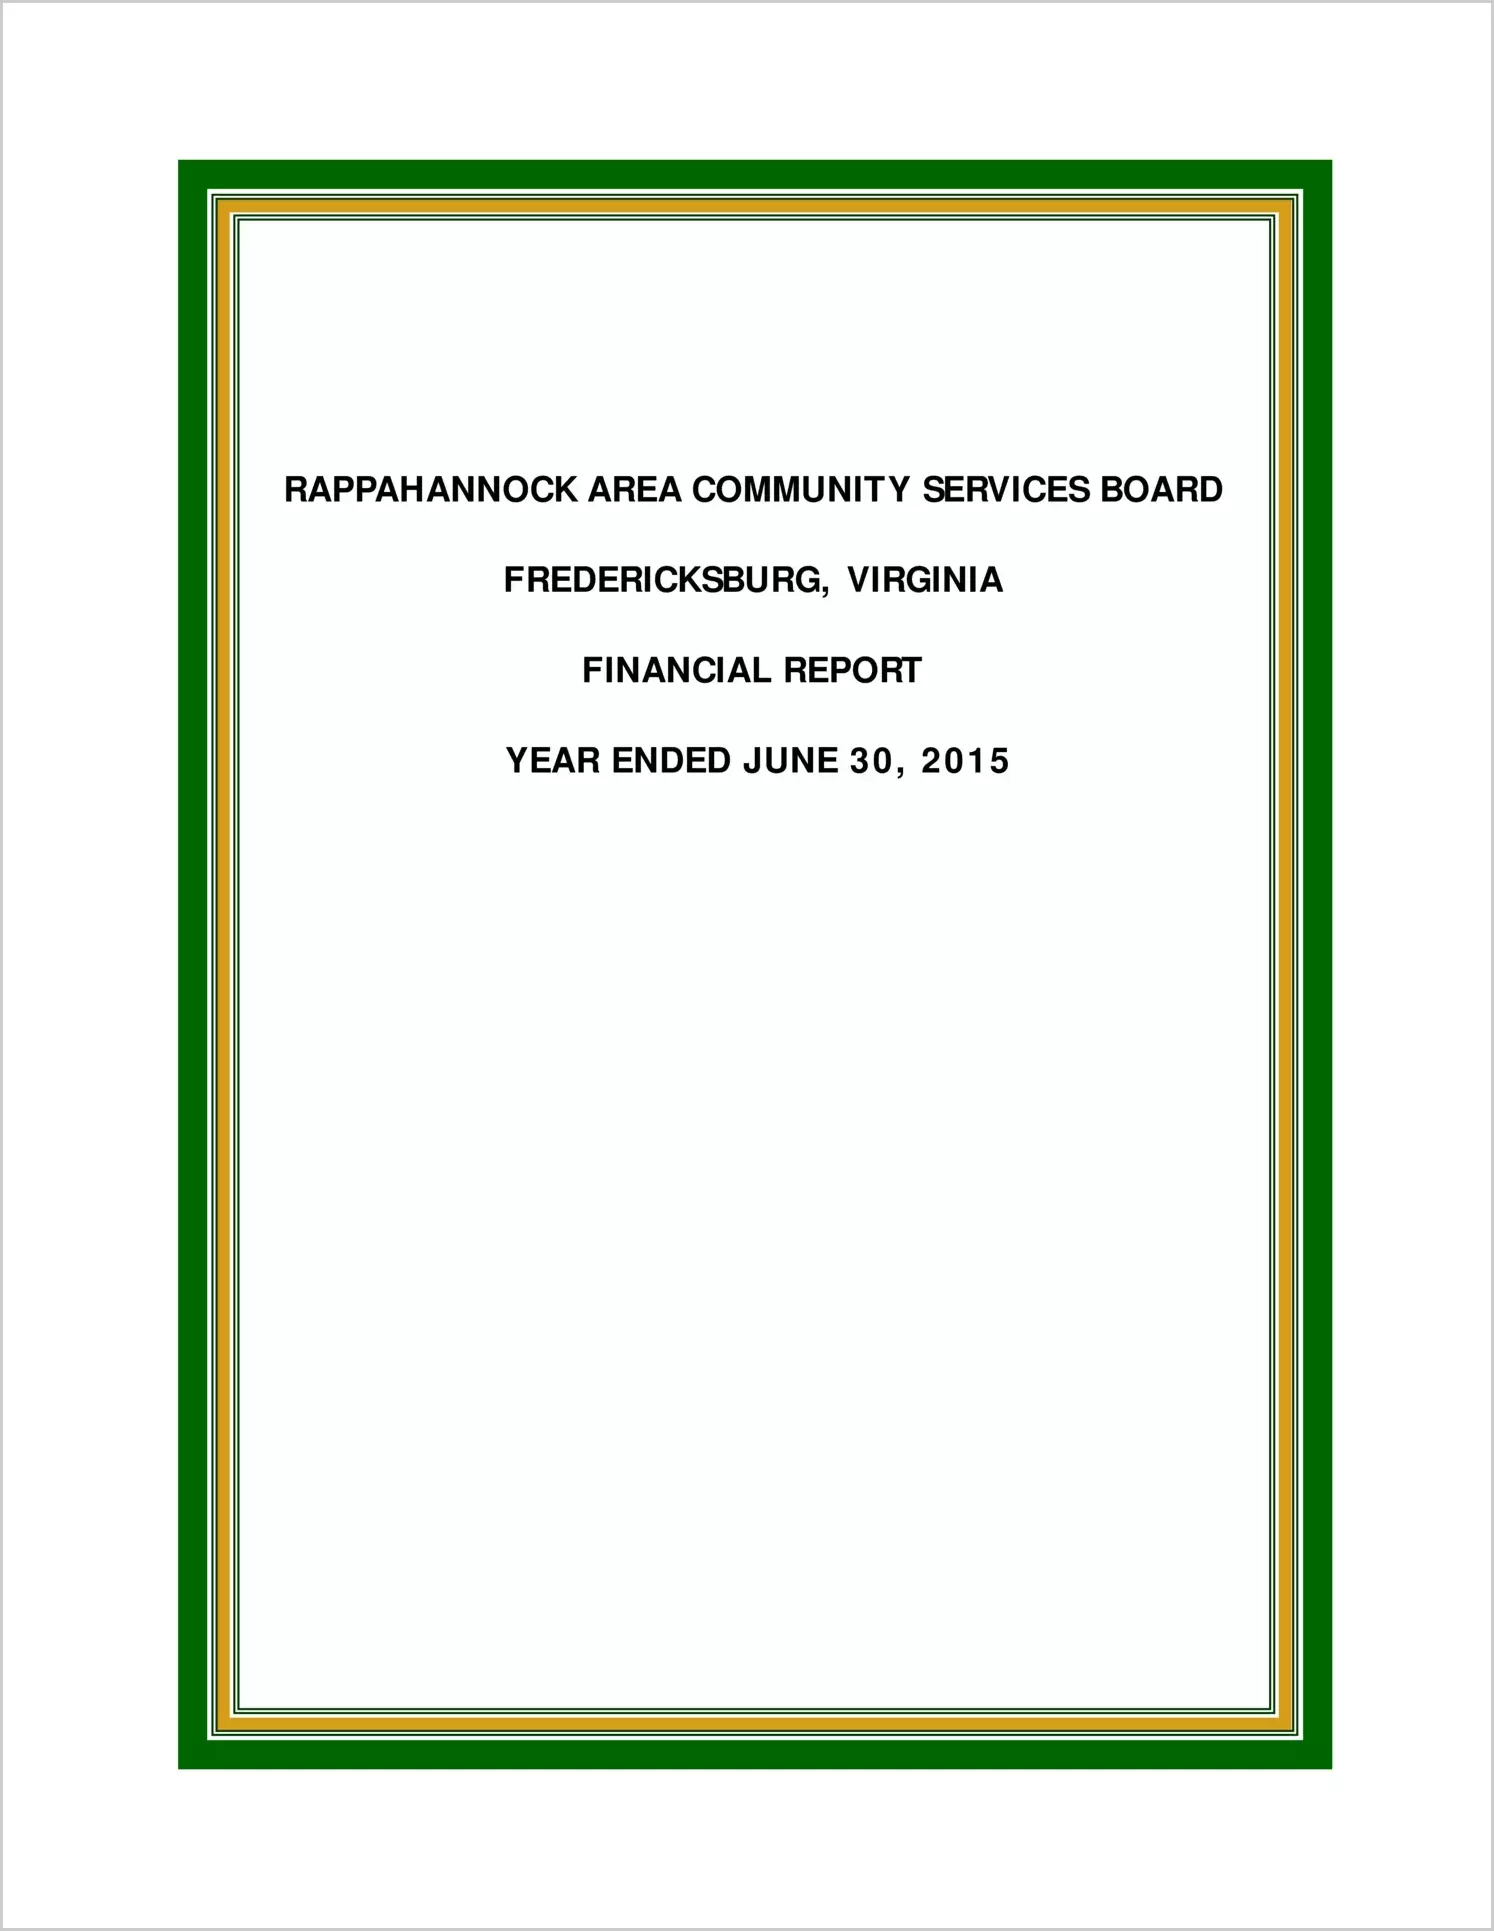 2015 ABC/Other Annual Financial Report  for Rappahannock Area Community Services Board